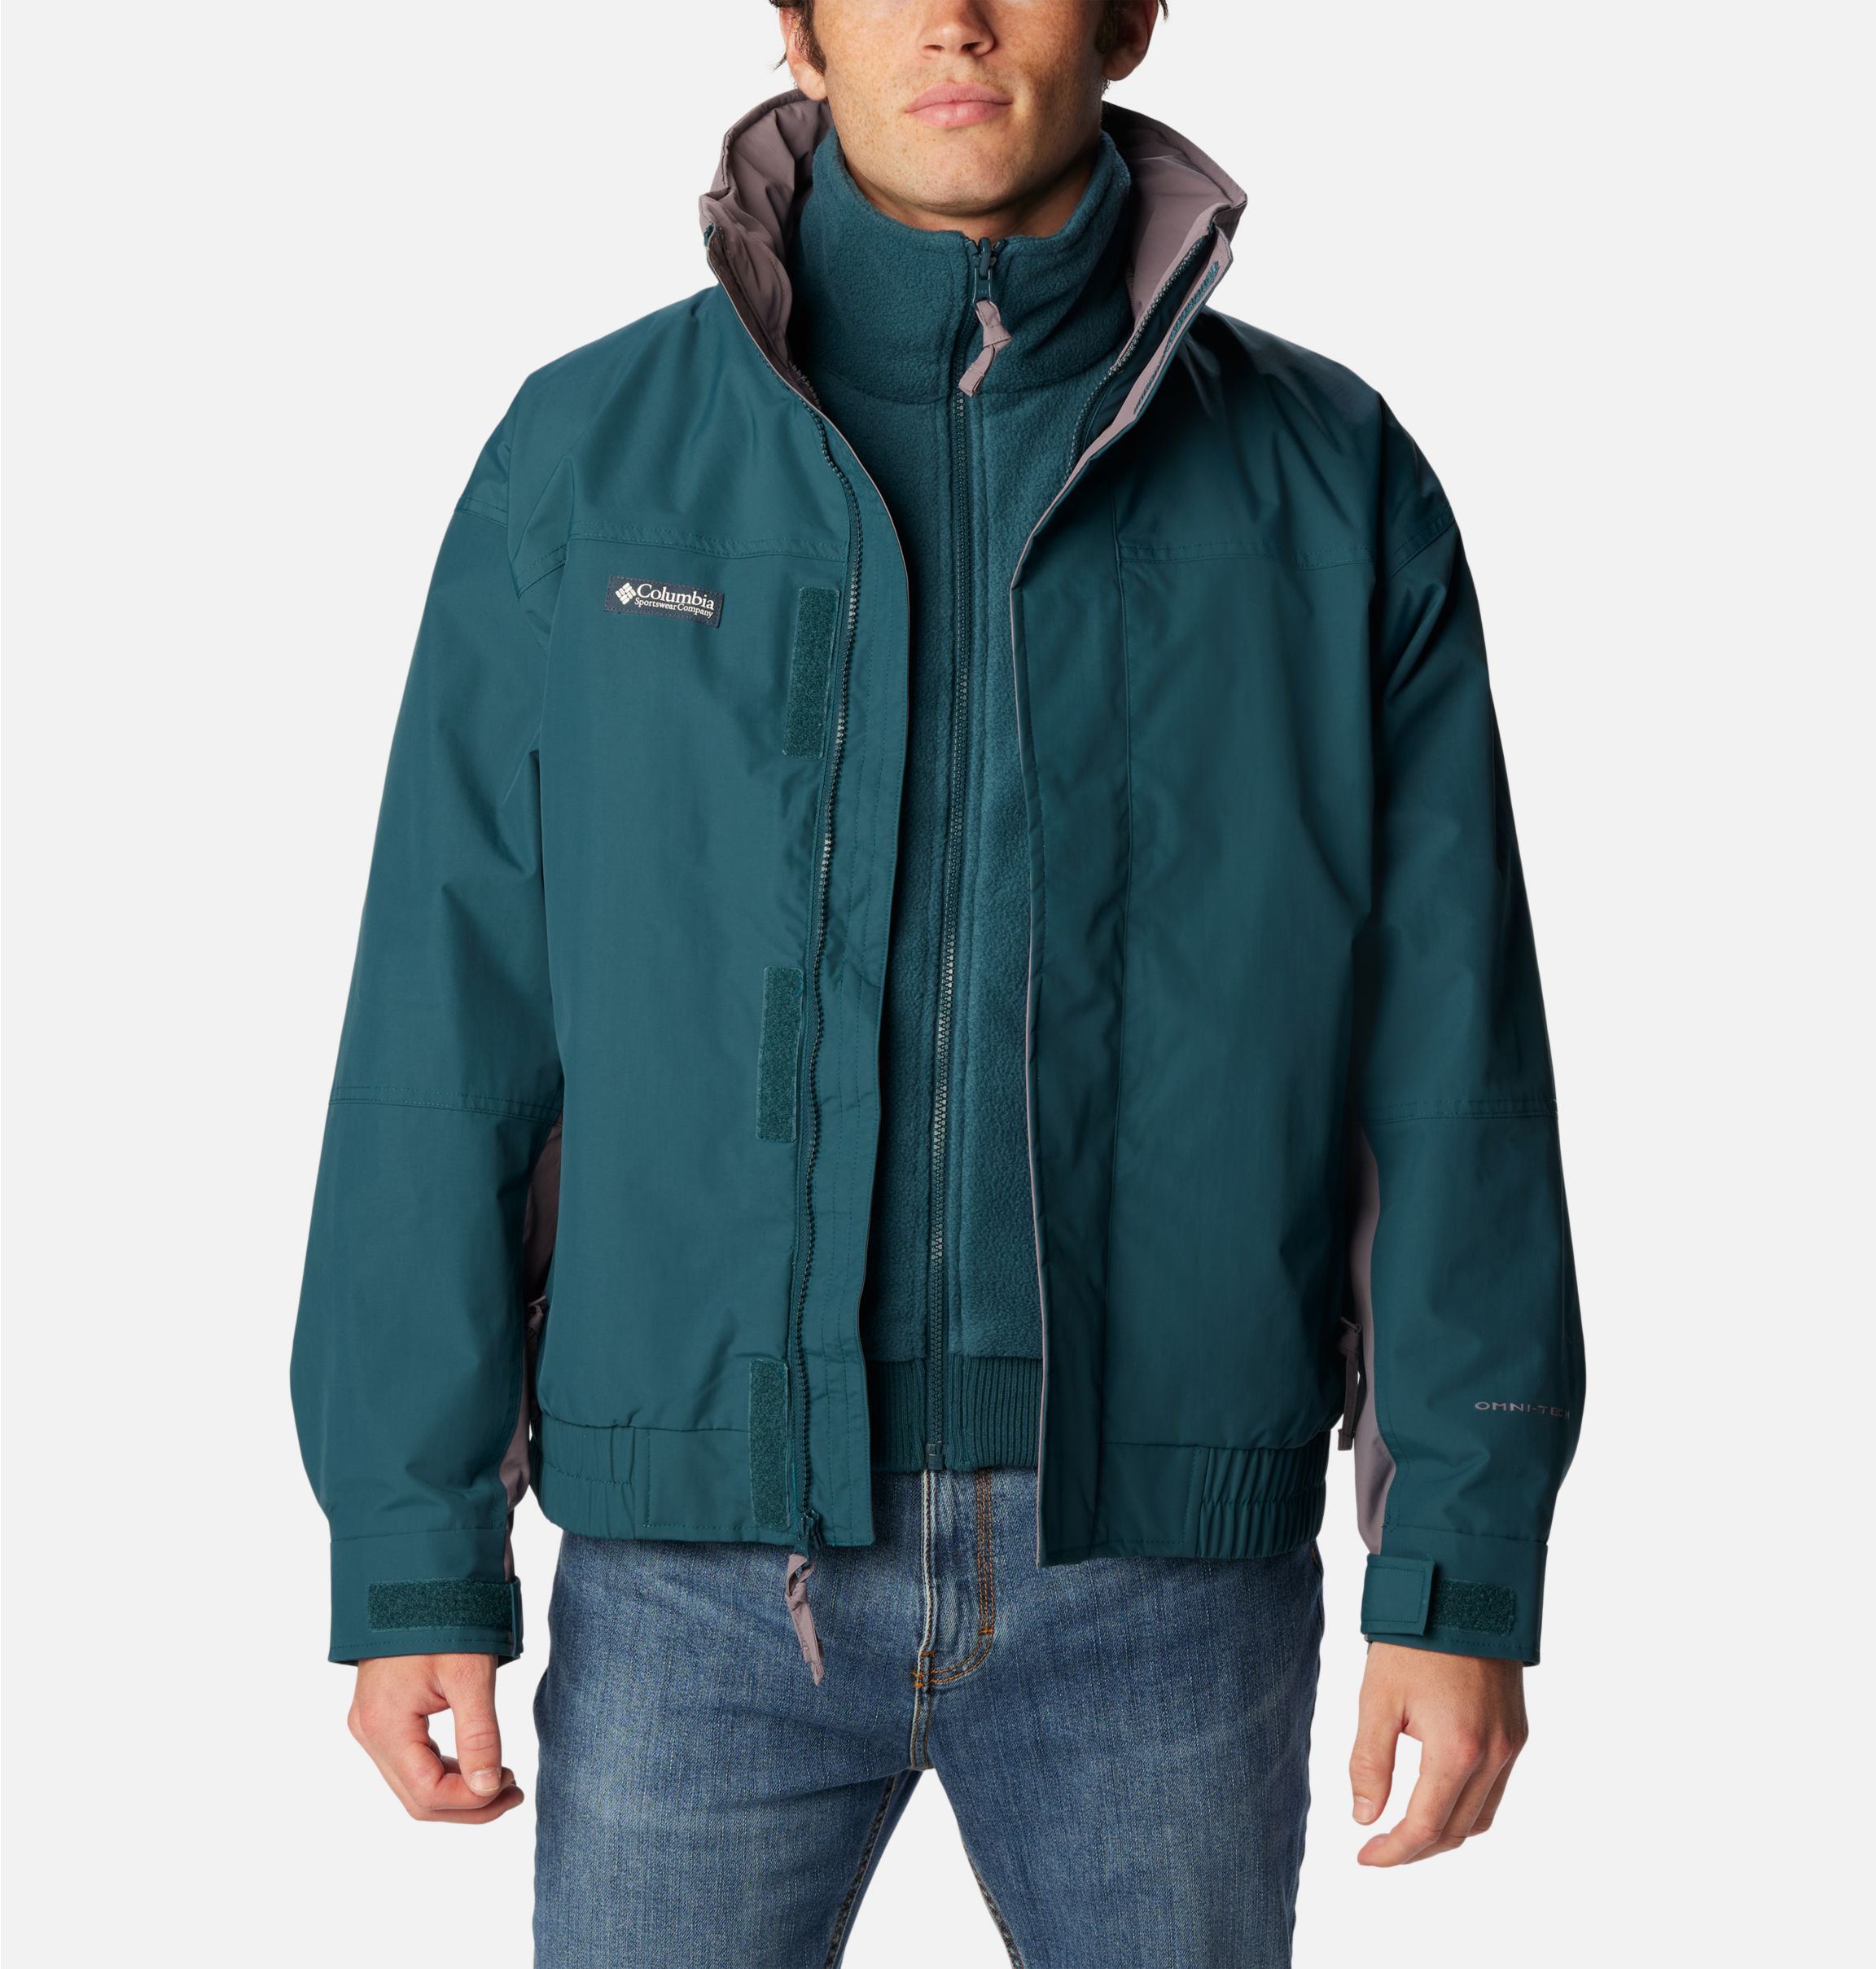 Columbia Sportswear Interchange Omni-Tech jacket, men's size Small (S) -  clothing & accessories - by owner - apparel